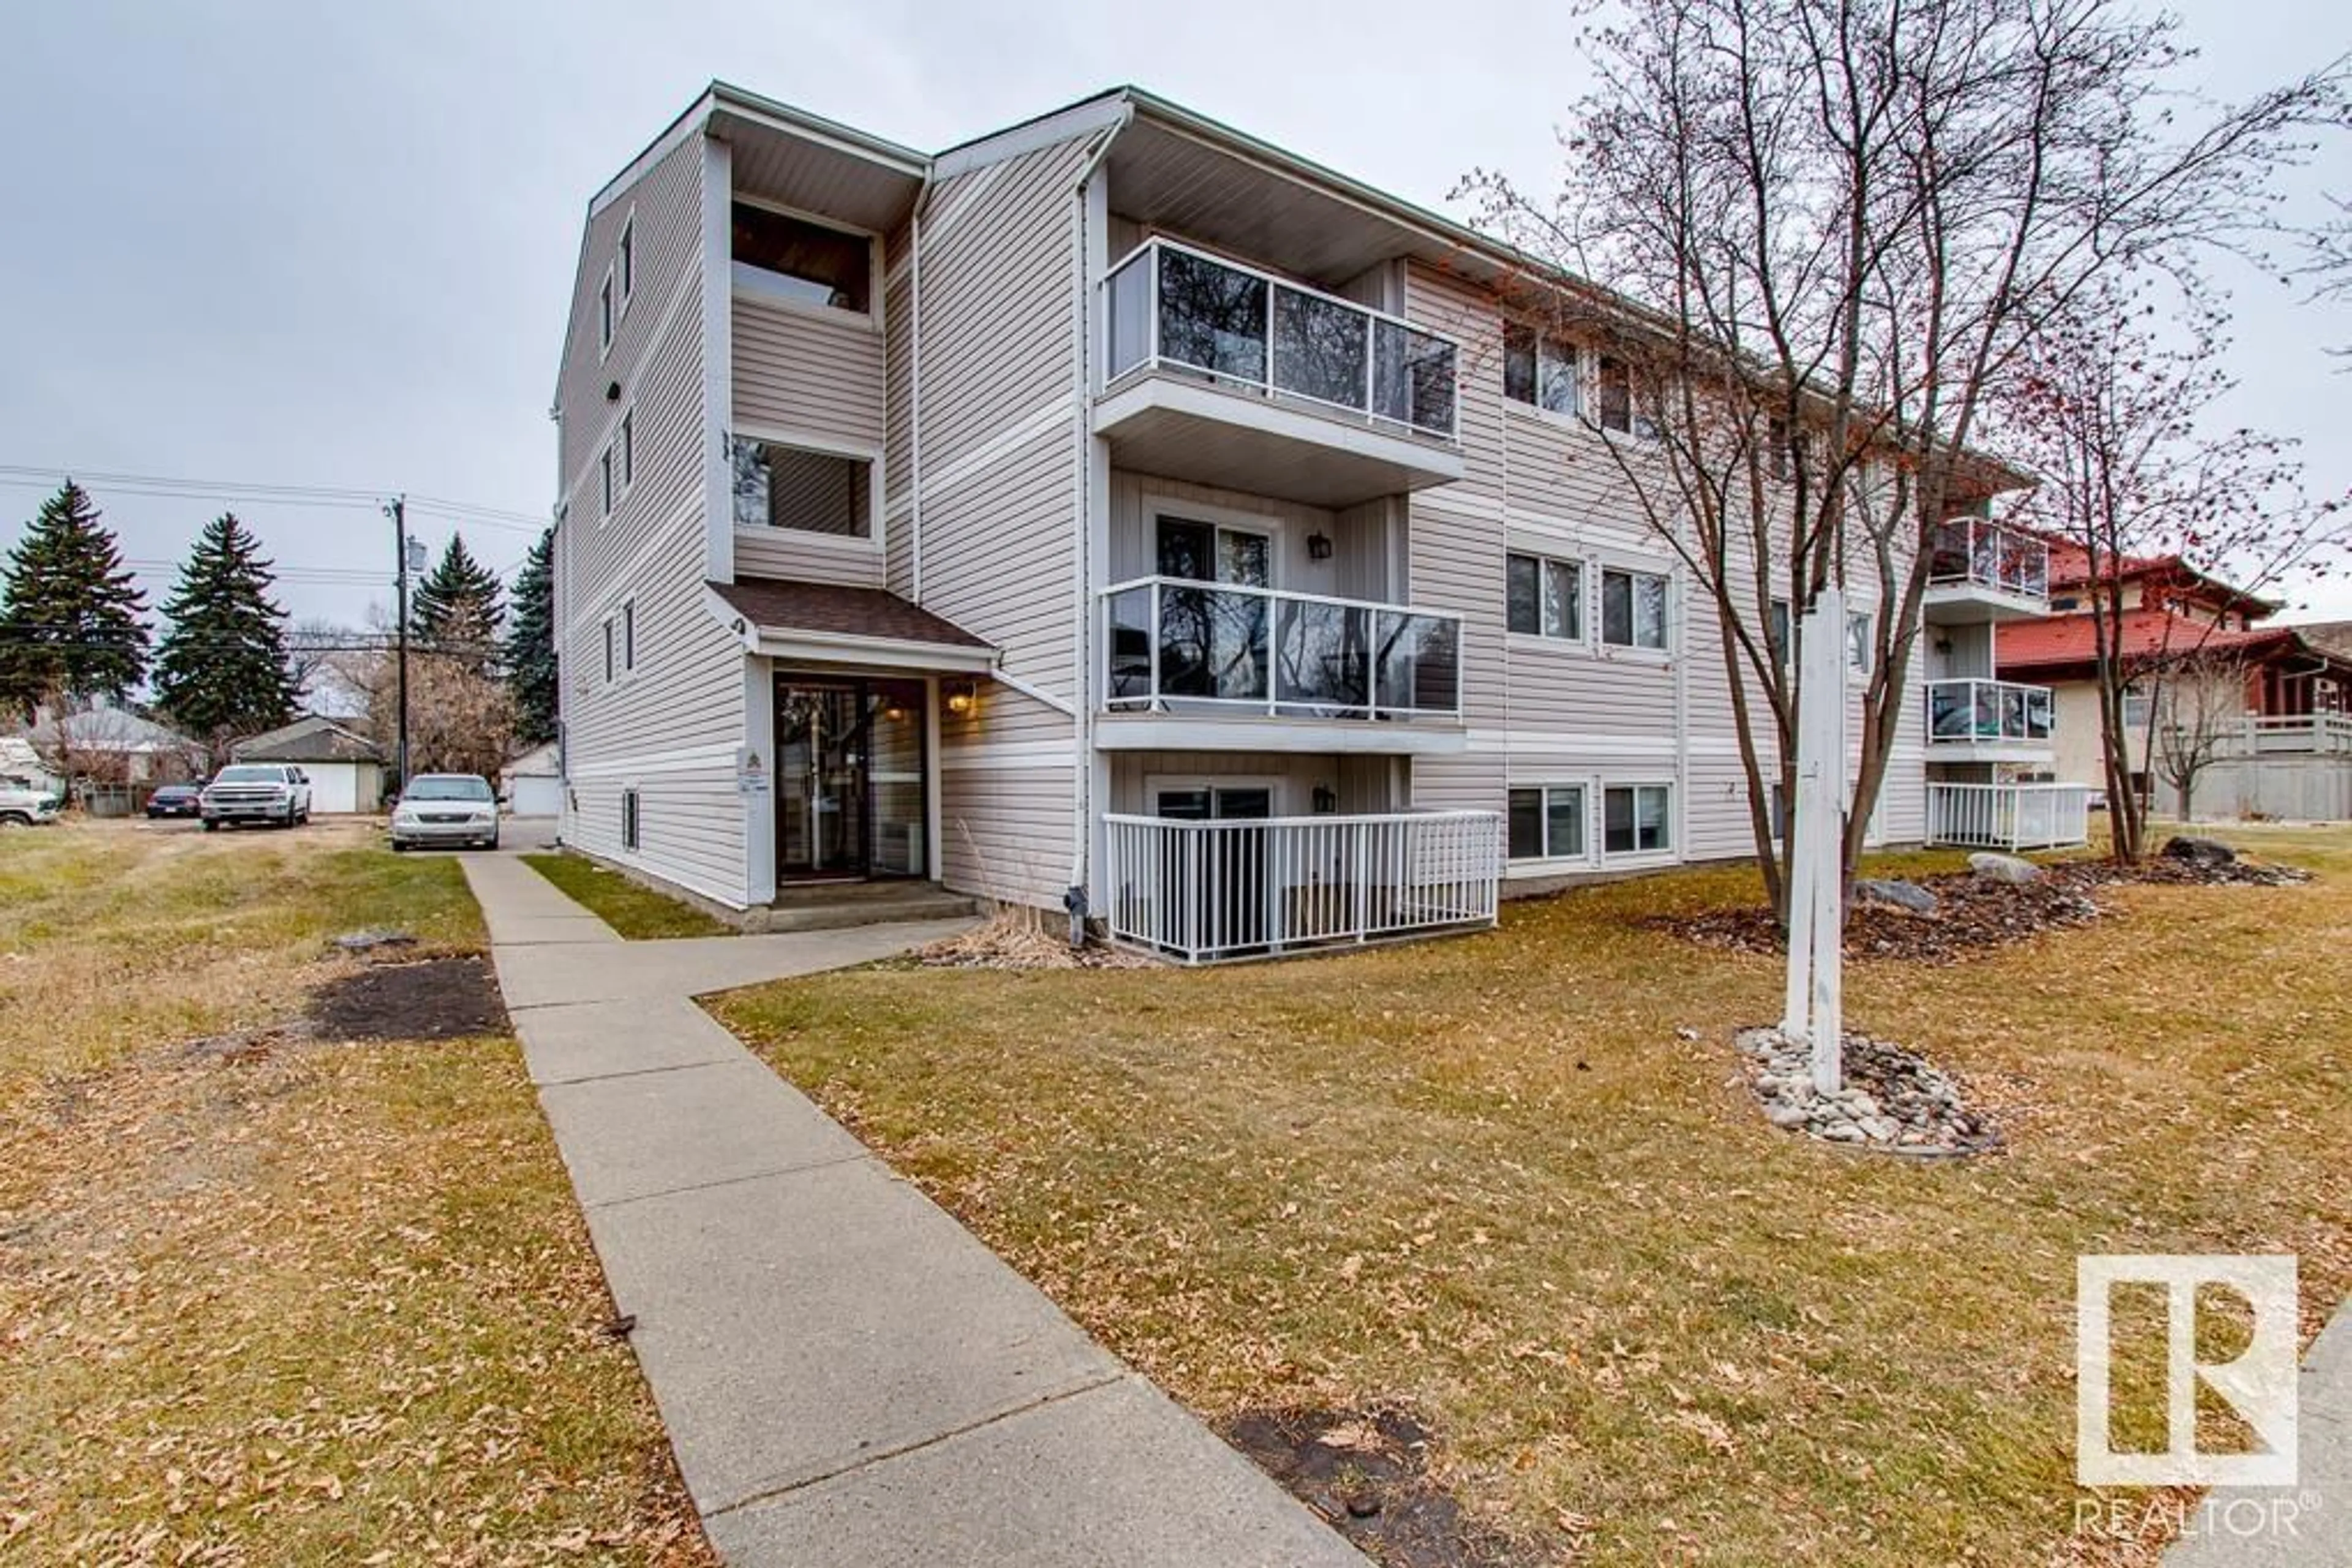 A pic from exterior of the house or condo for #105 11324 97 ST NW, Edmonton Alberta T5G1X1